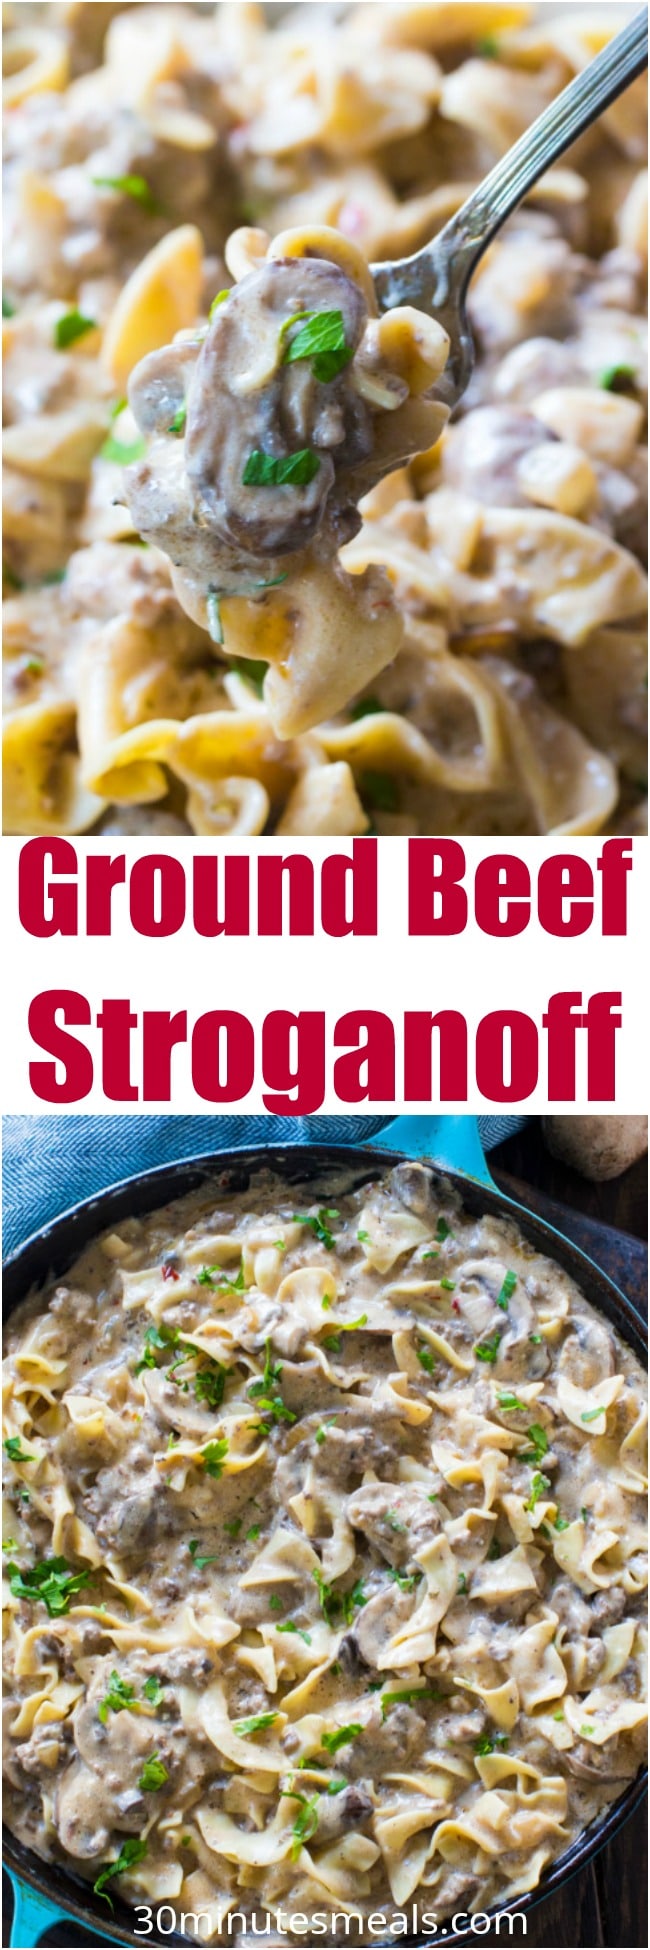 The best Ground Beef Stroganoff is so unbelievably creamy thanks to a few secret ingredients. Easy to make, in just 30 minutes you have an amazing dinner!